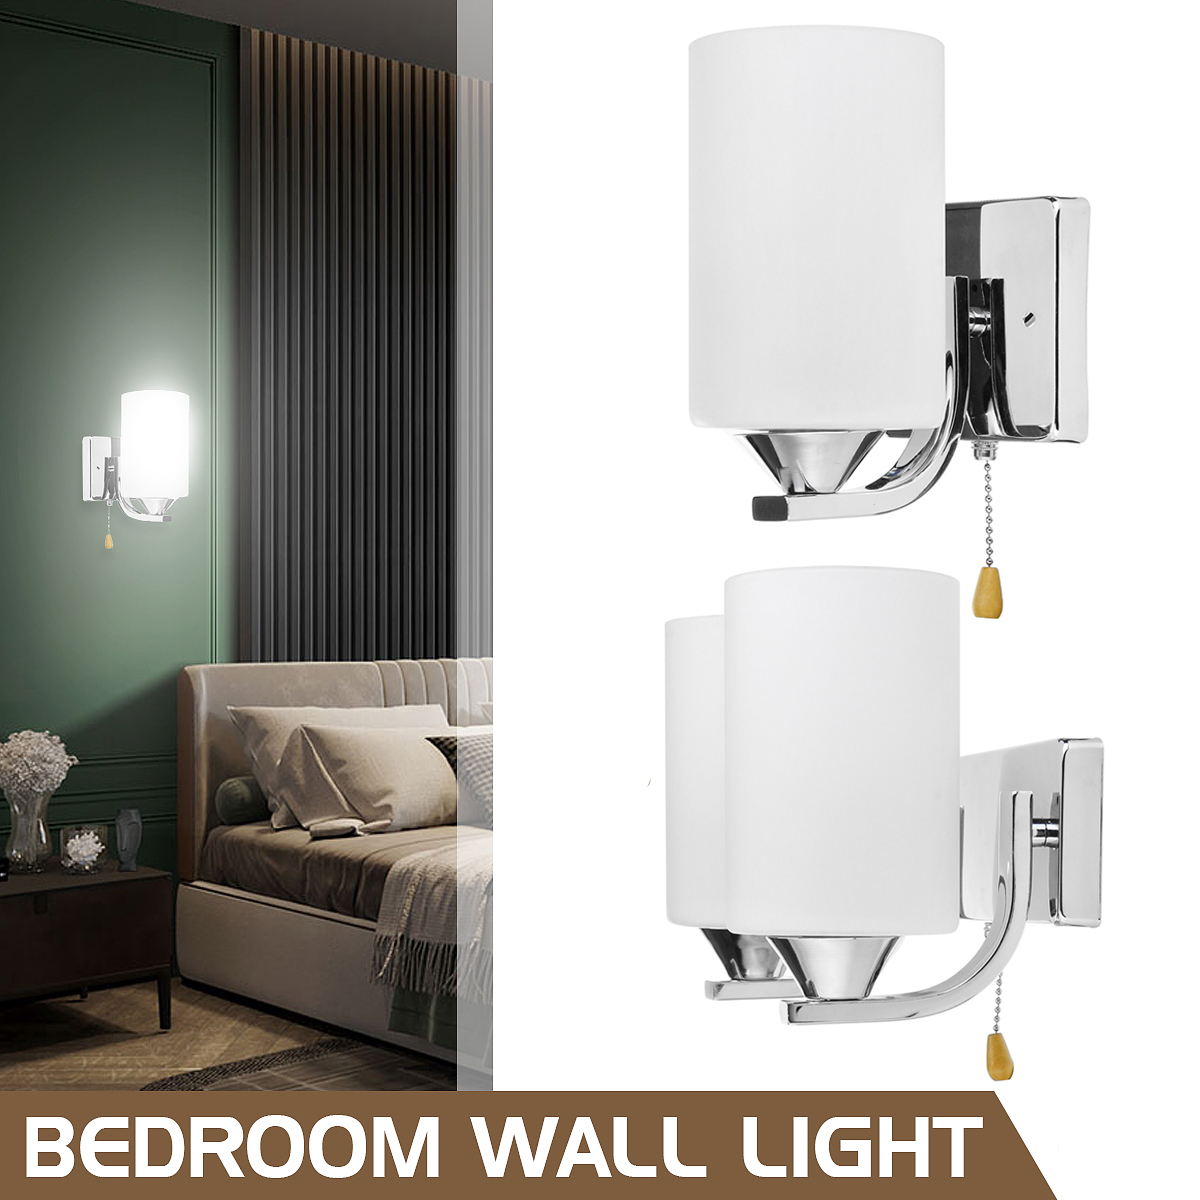 Bedroom-Glass-Wall-Sconce-Light-Indoor-Fixture-Bedside-LampLED-Bulb-Pull-Switch-1763737-2